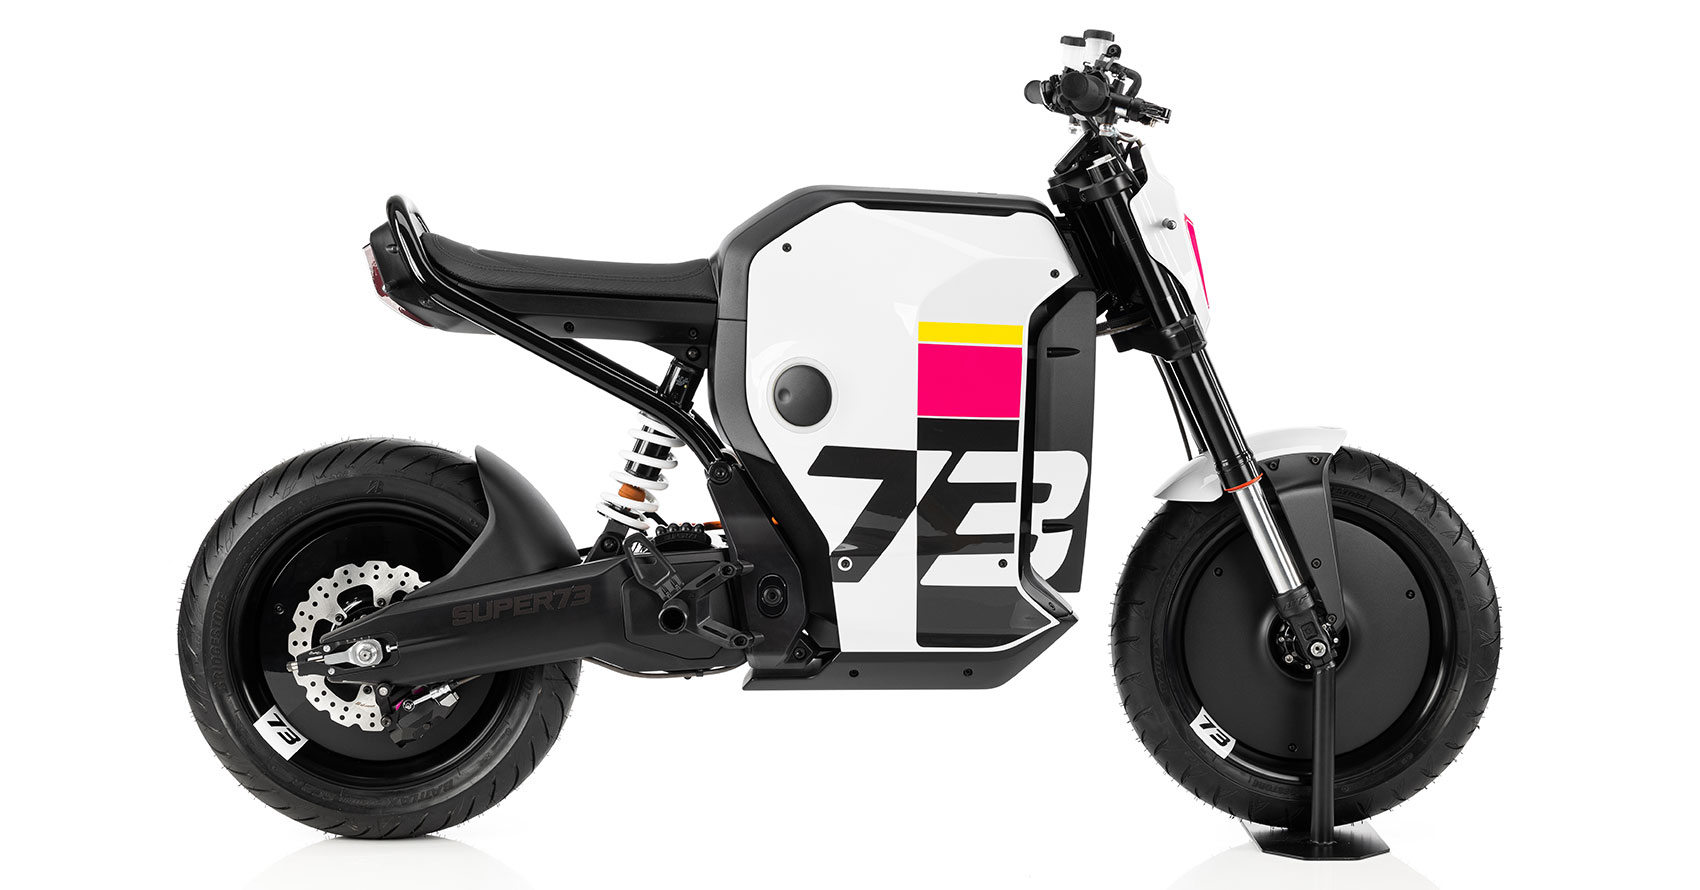 New Kid on the Block Super73s C1X electric motorcycle Bike EXIF